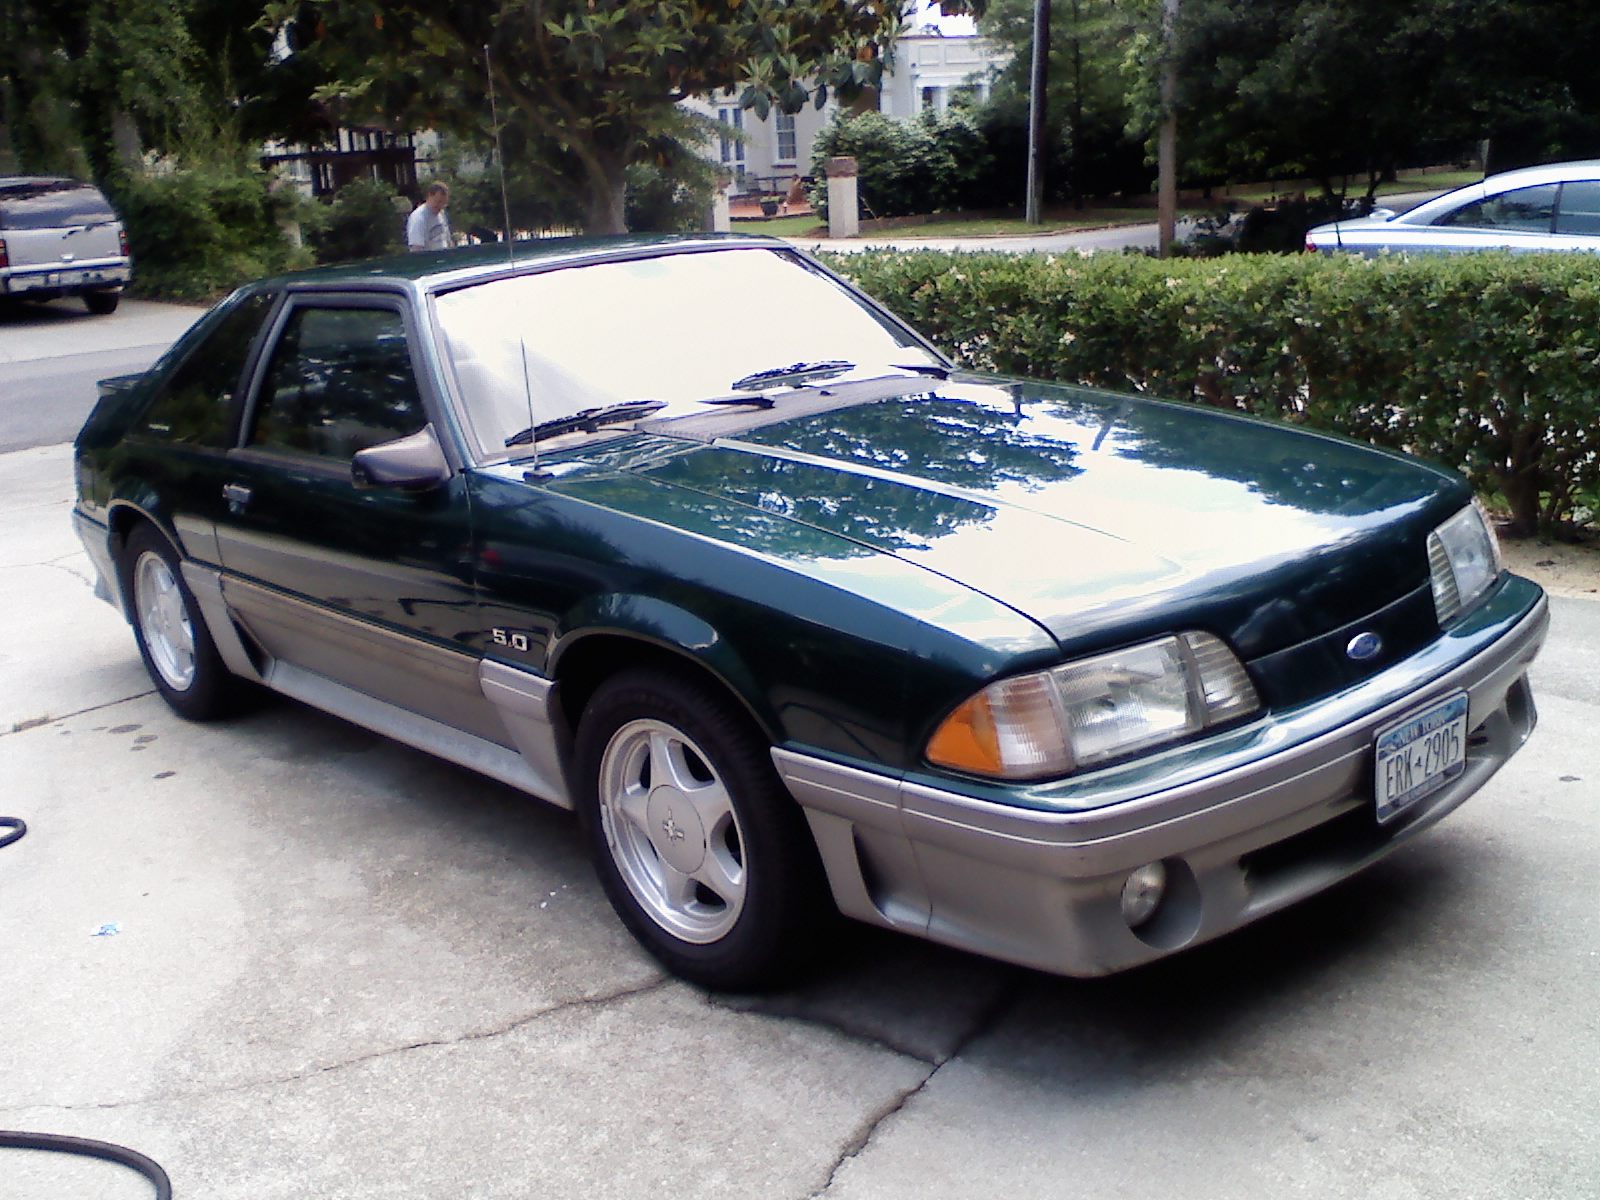 1991 Ford mustang gt 5.0 specs #1